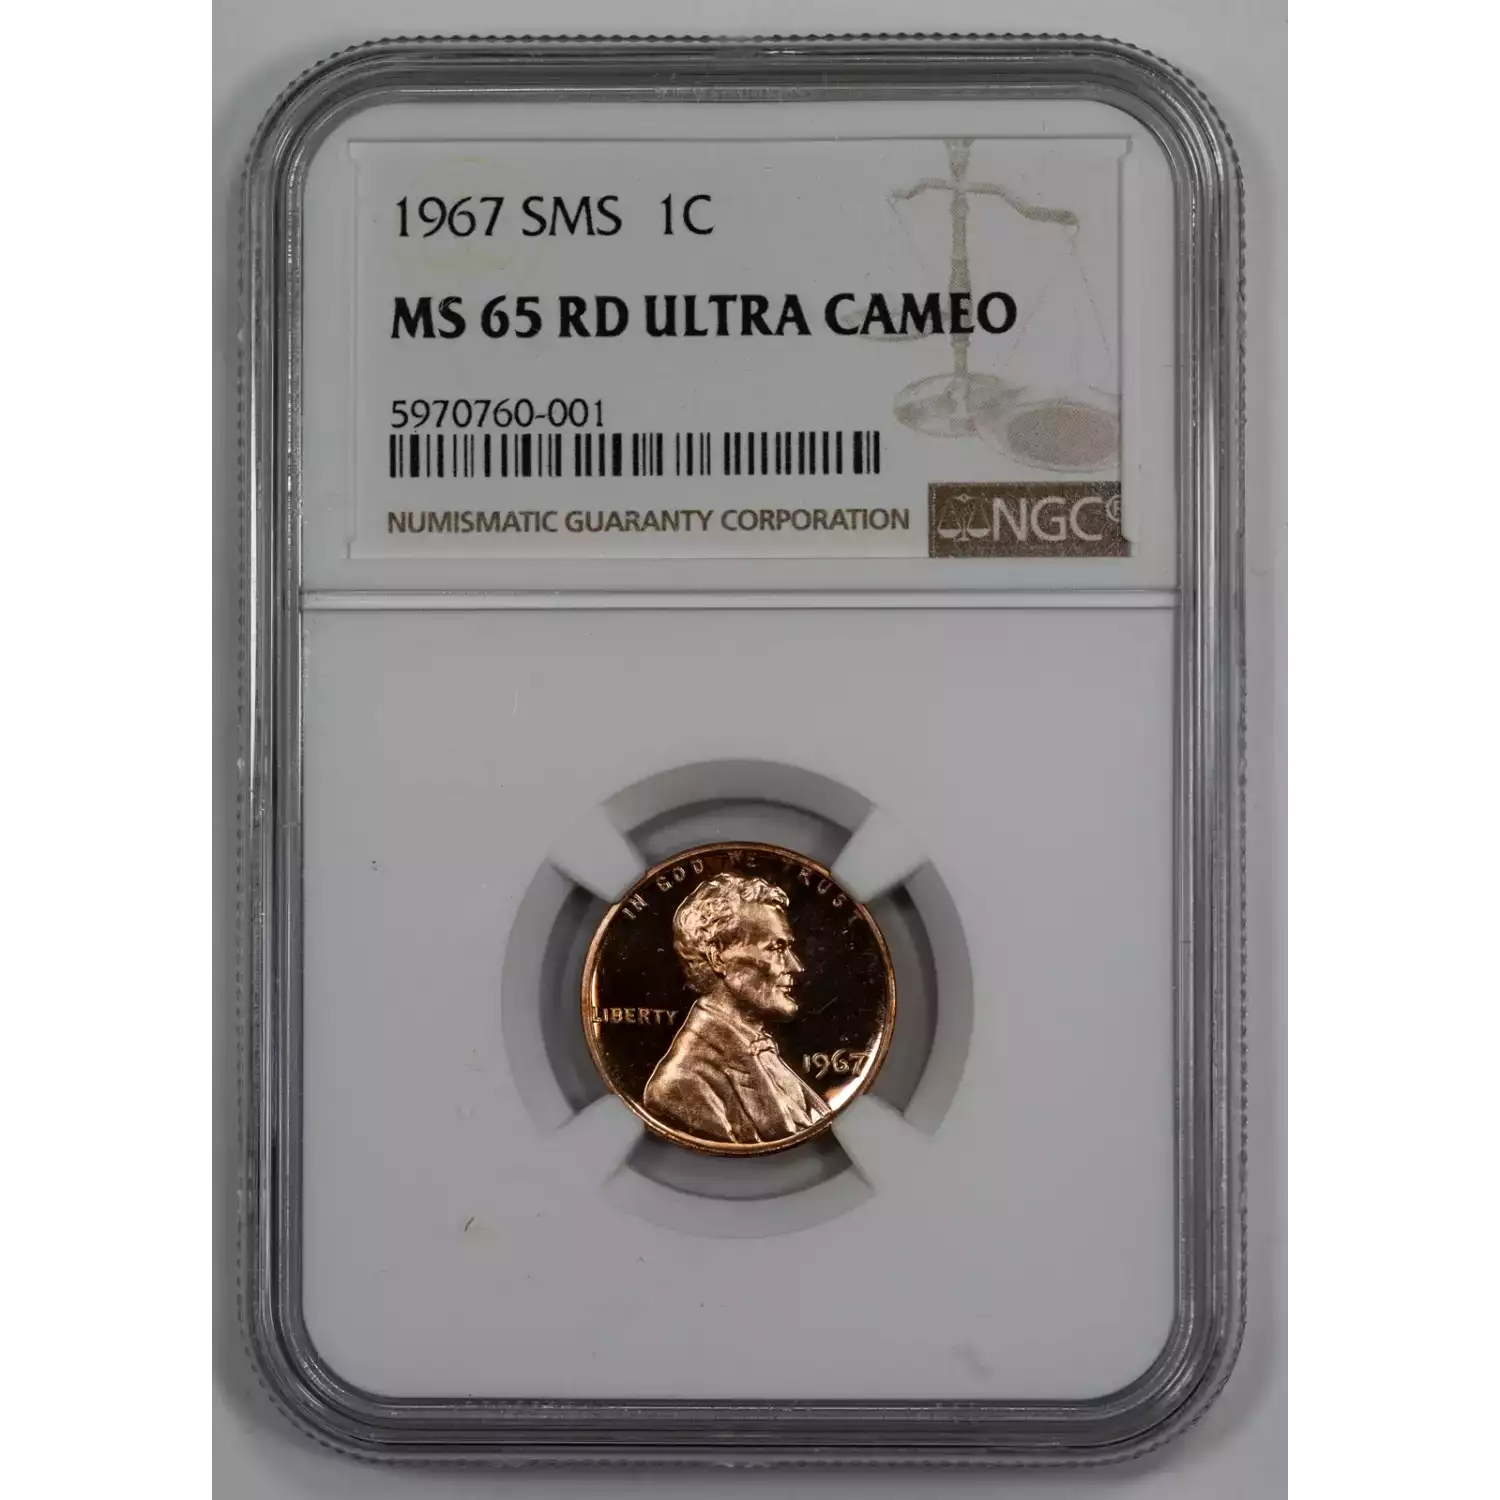 1967 SMS  RD ULTRA CAMEO